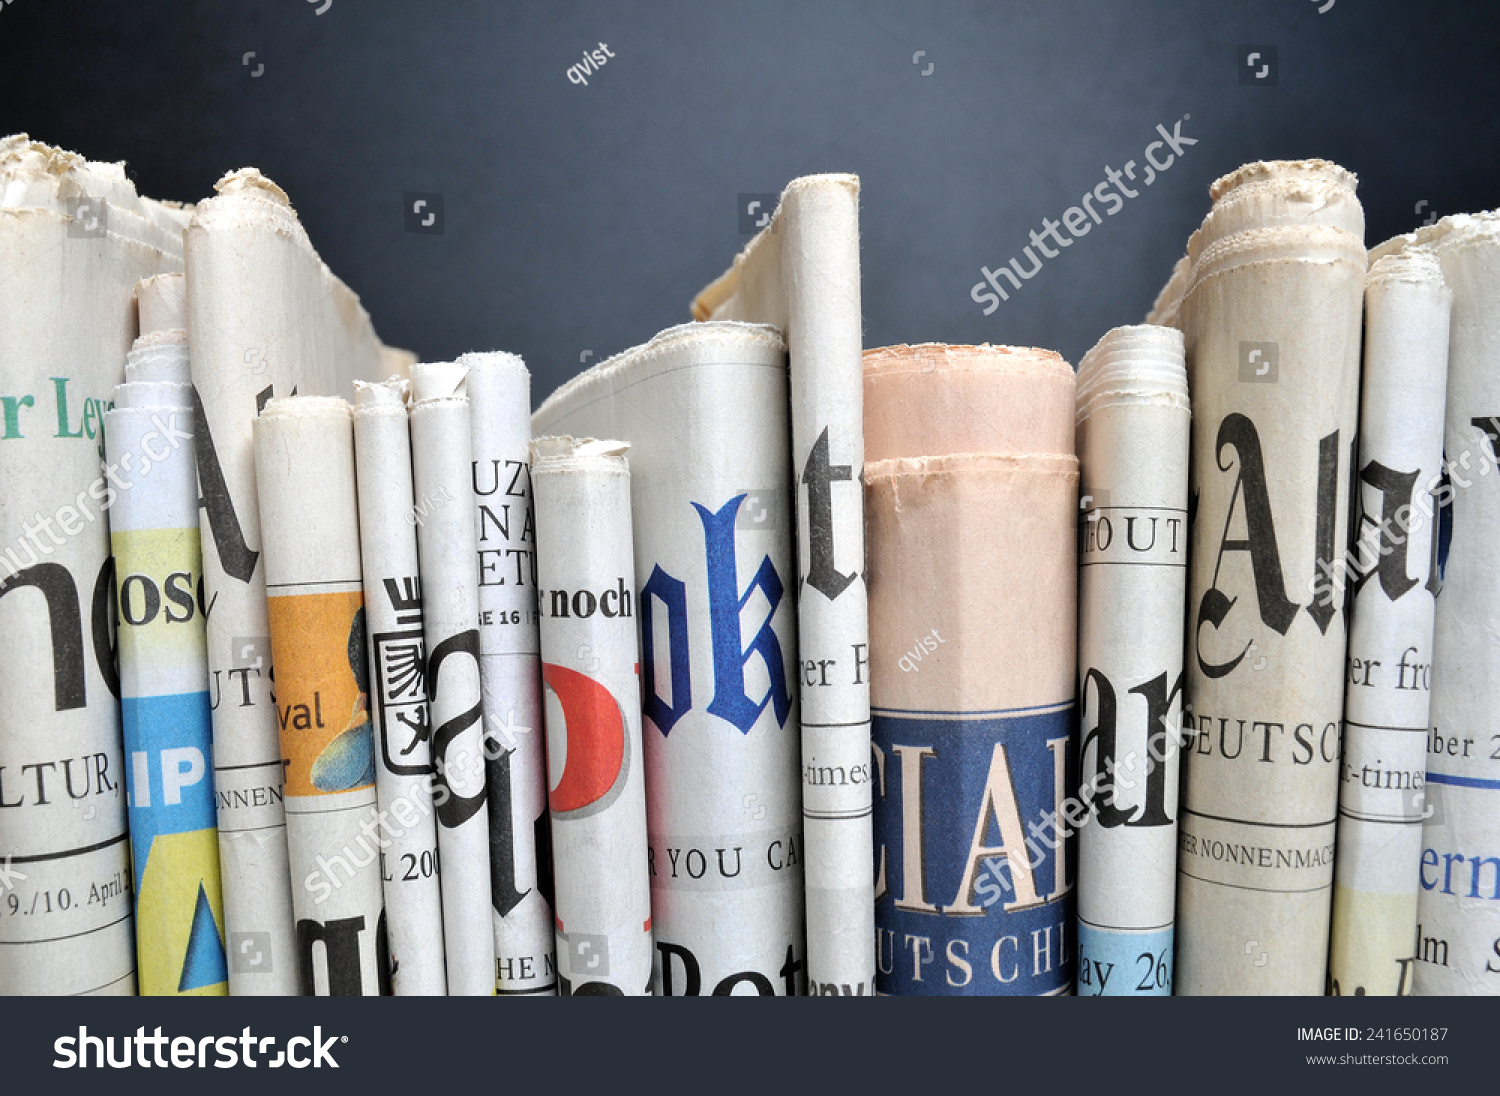 News - Folded newspapers in front of black wall #241650187